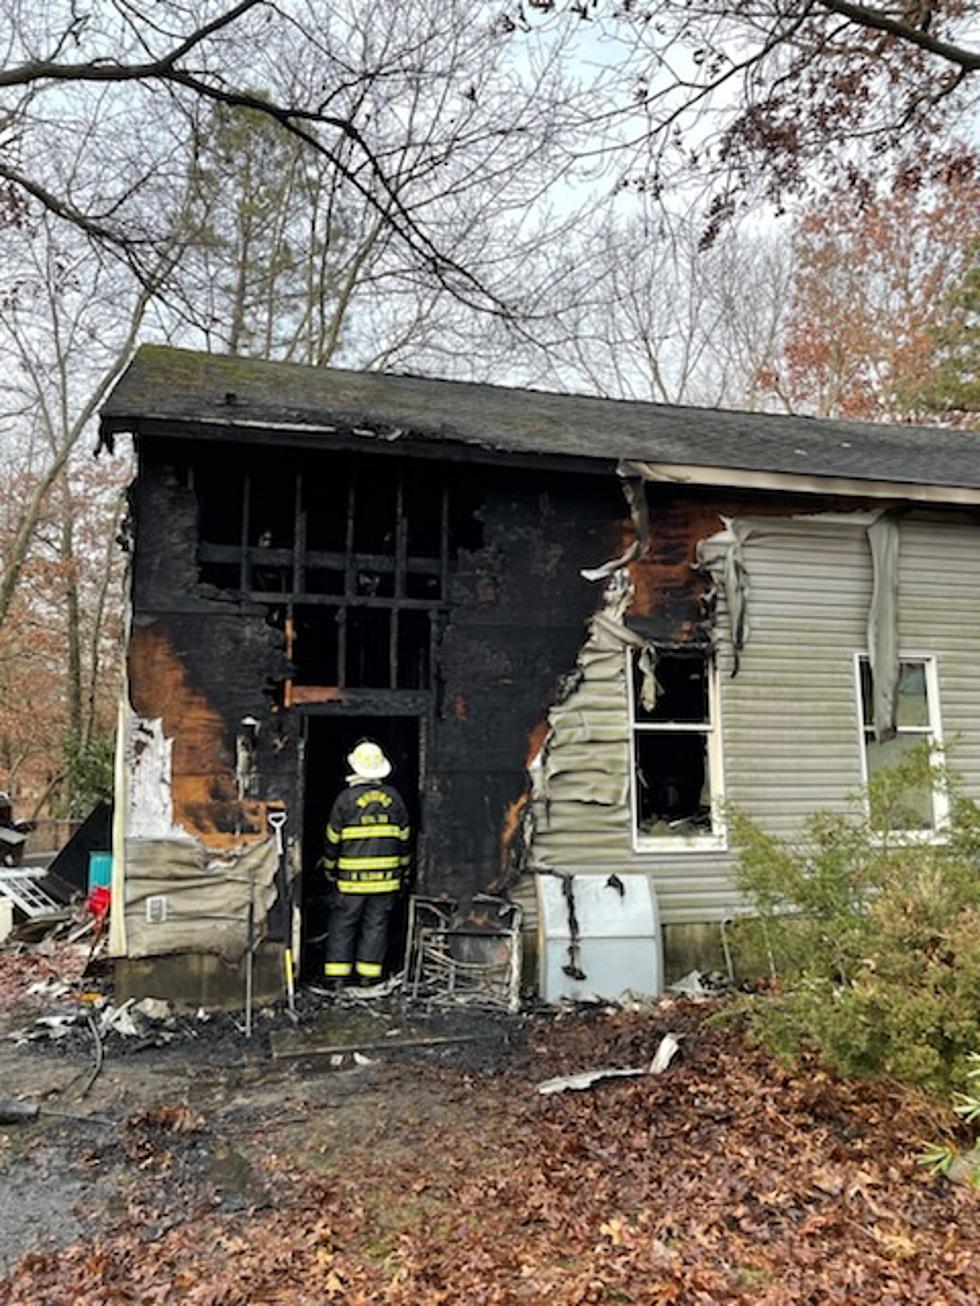 Fire that destroyed part of a home in Manchester, NJ is under investigation